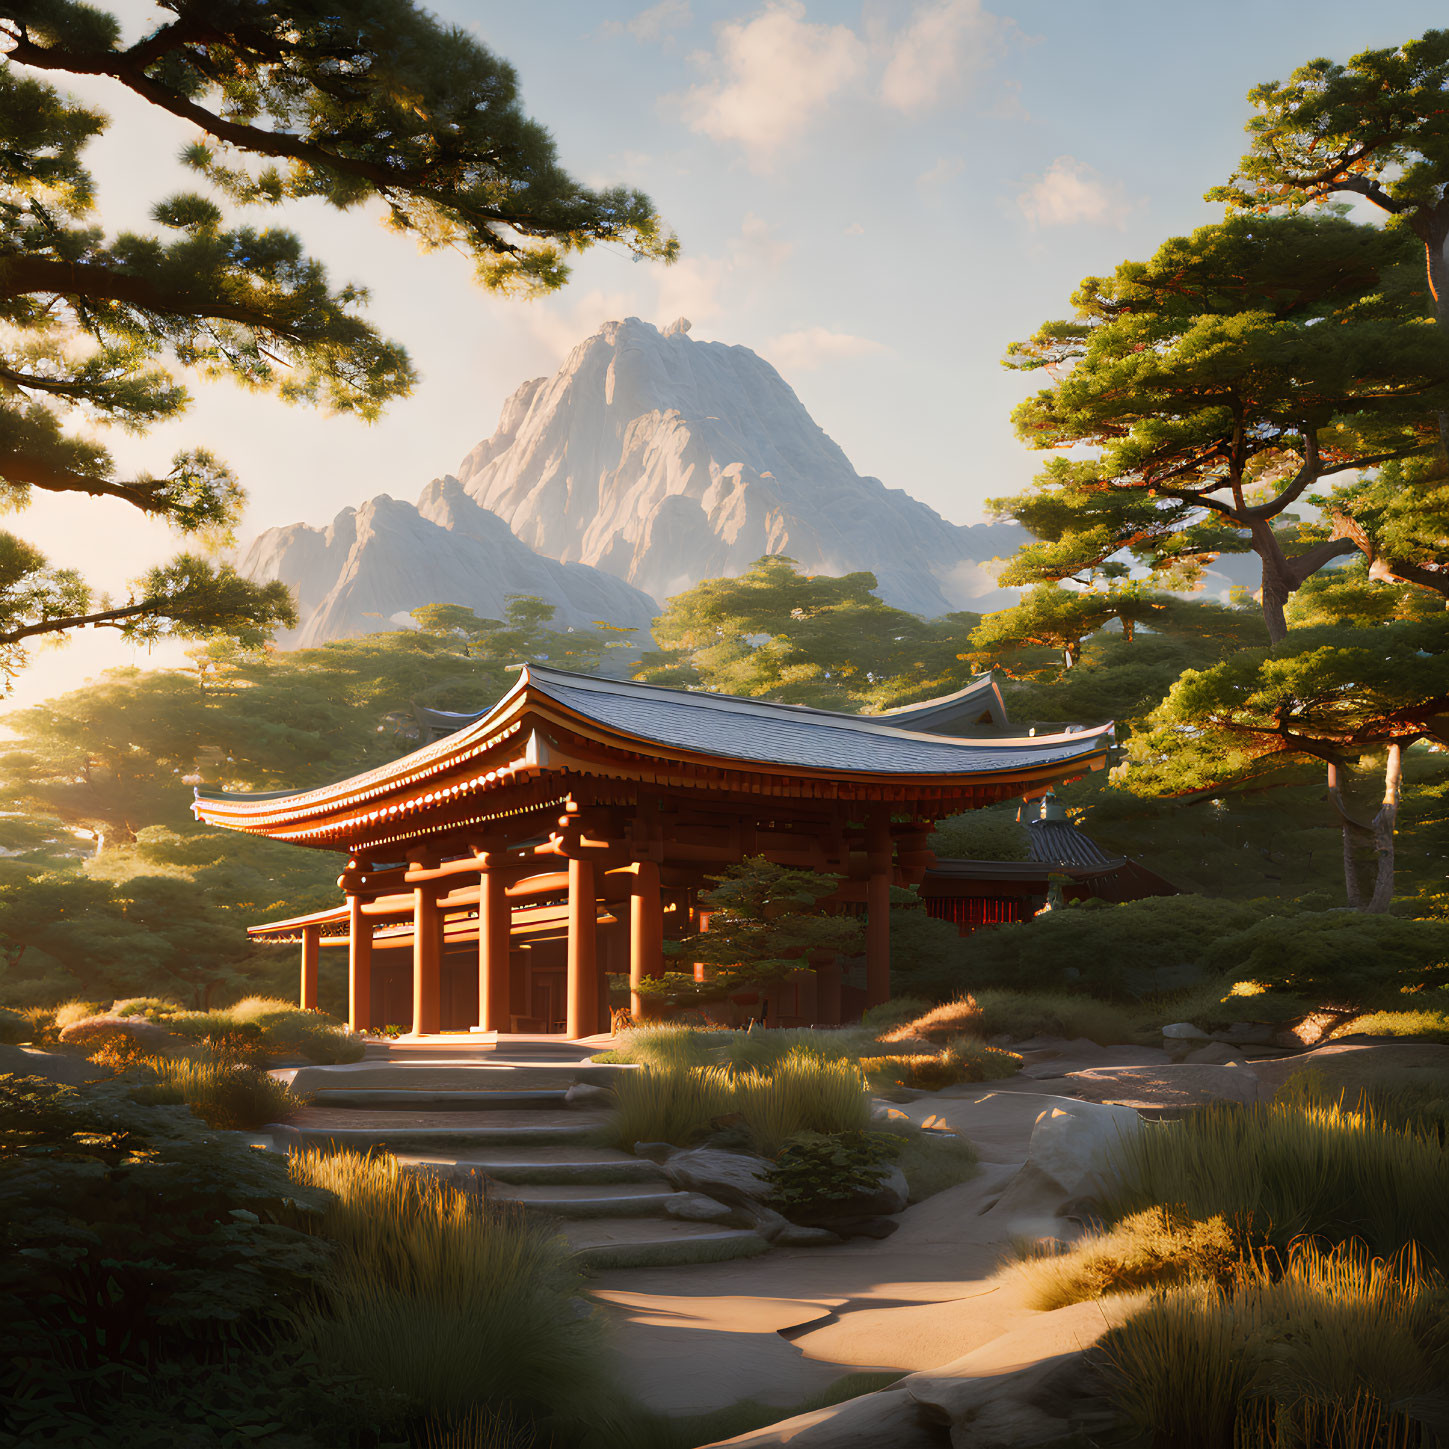 Serene forest setting with traditional East Asian temple architecture